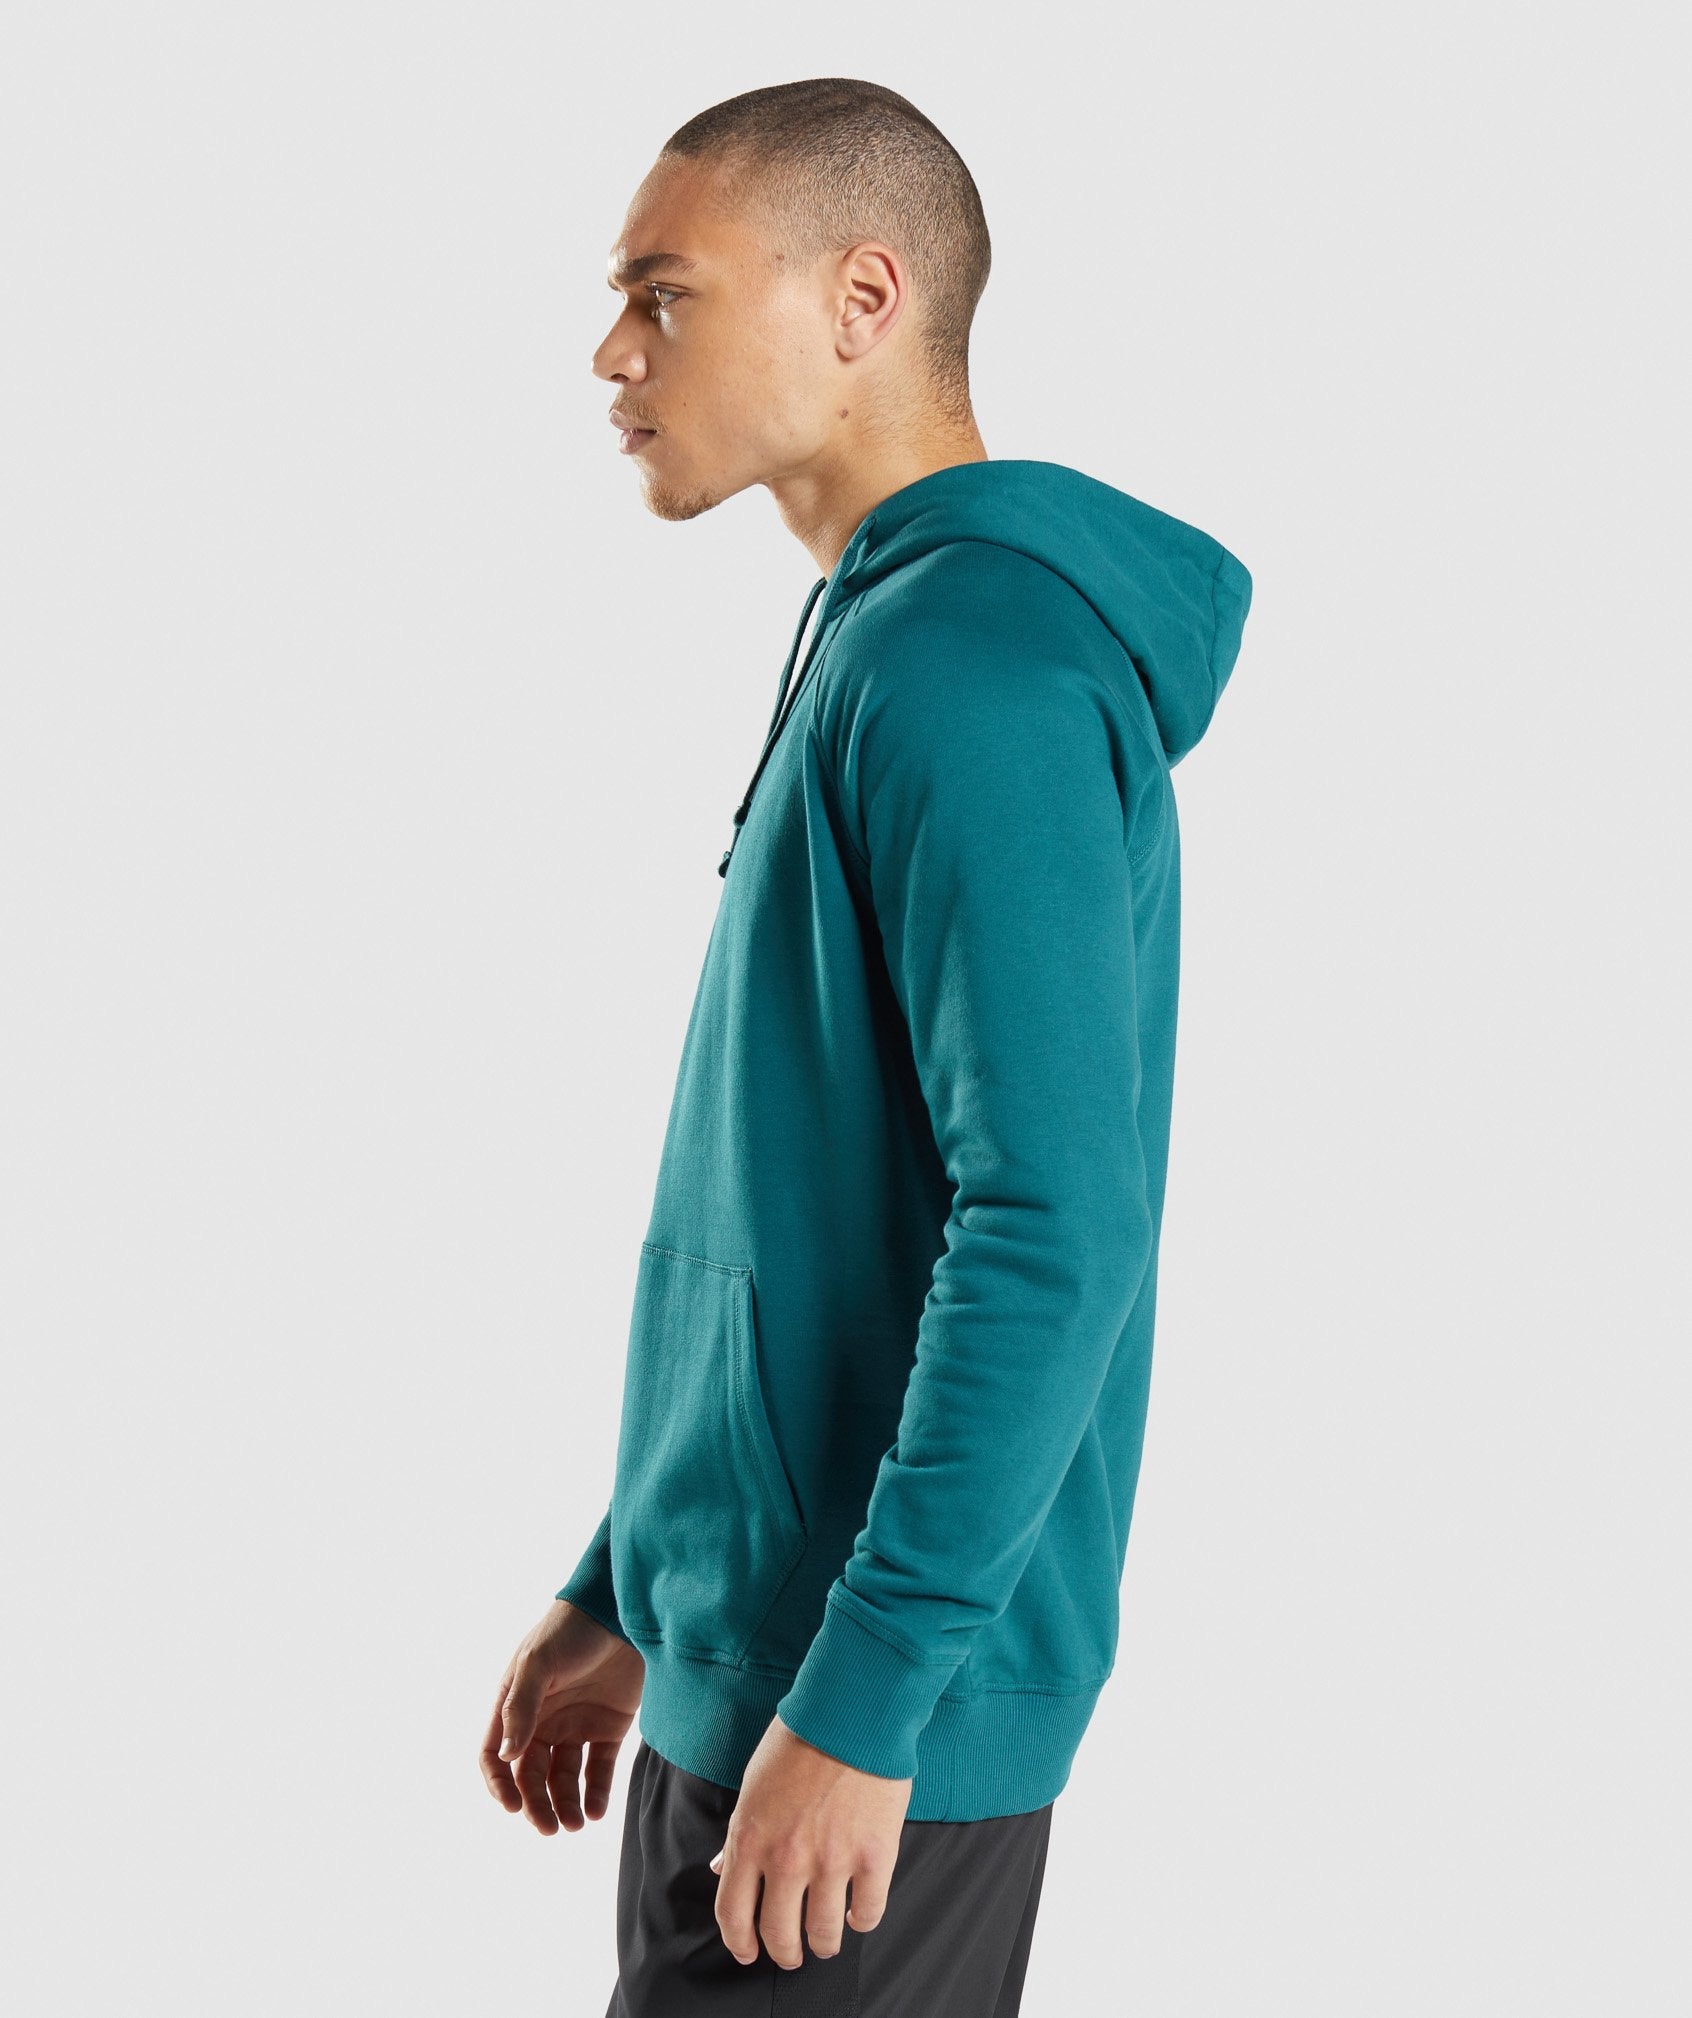 Sharkhead Infill Hoodie in Teal - view 3